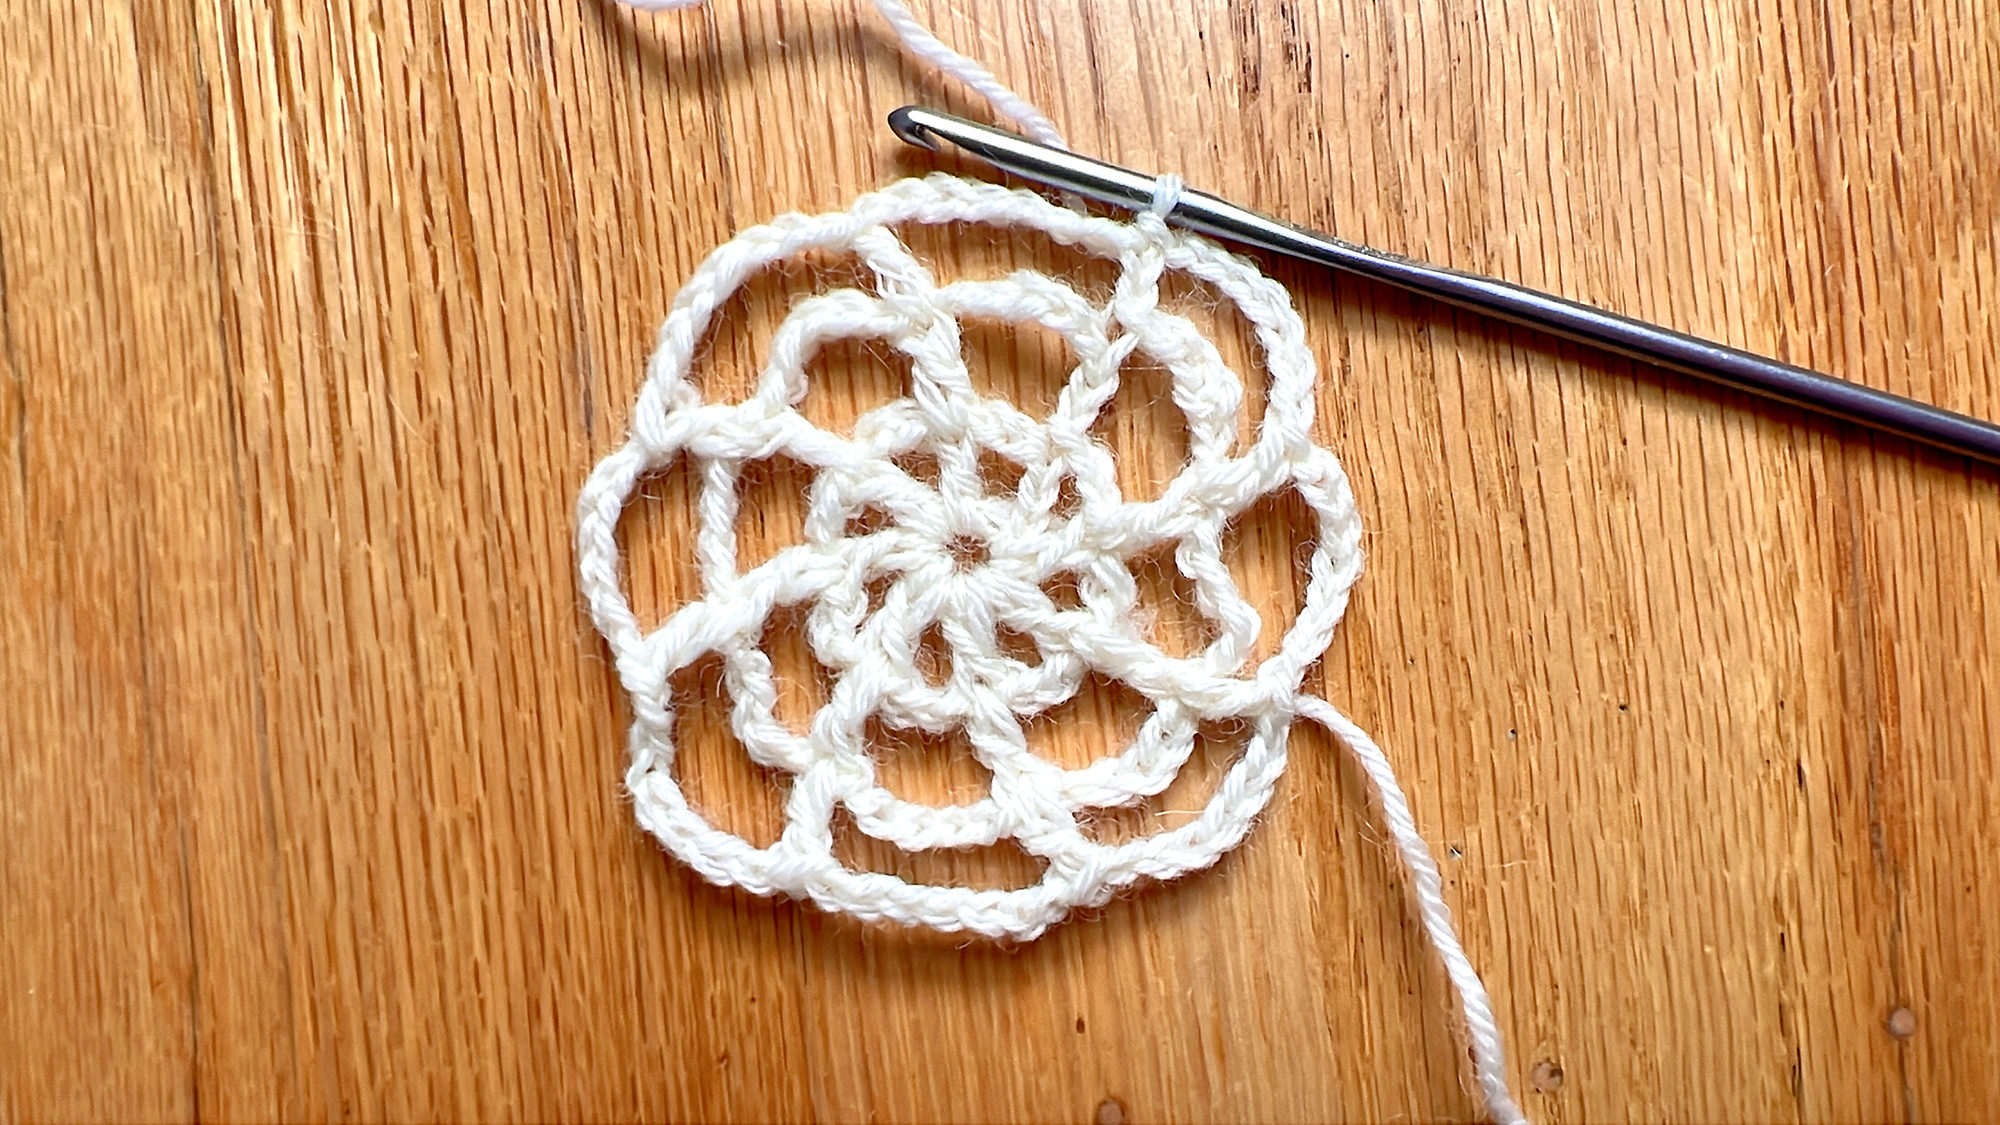 image of circular crochet project worked in ivory yarn on a wood floor